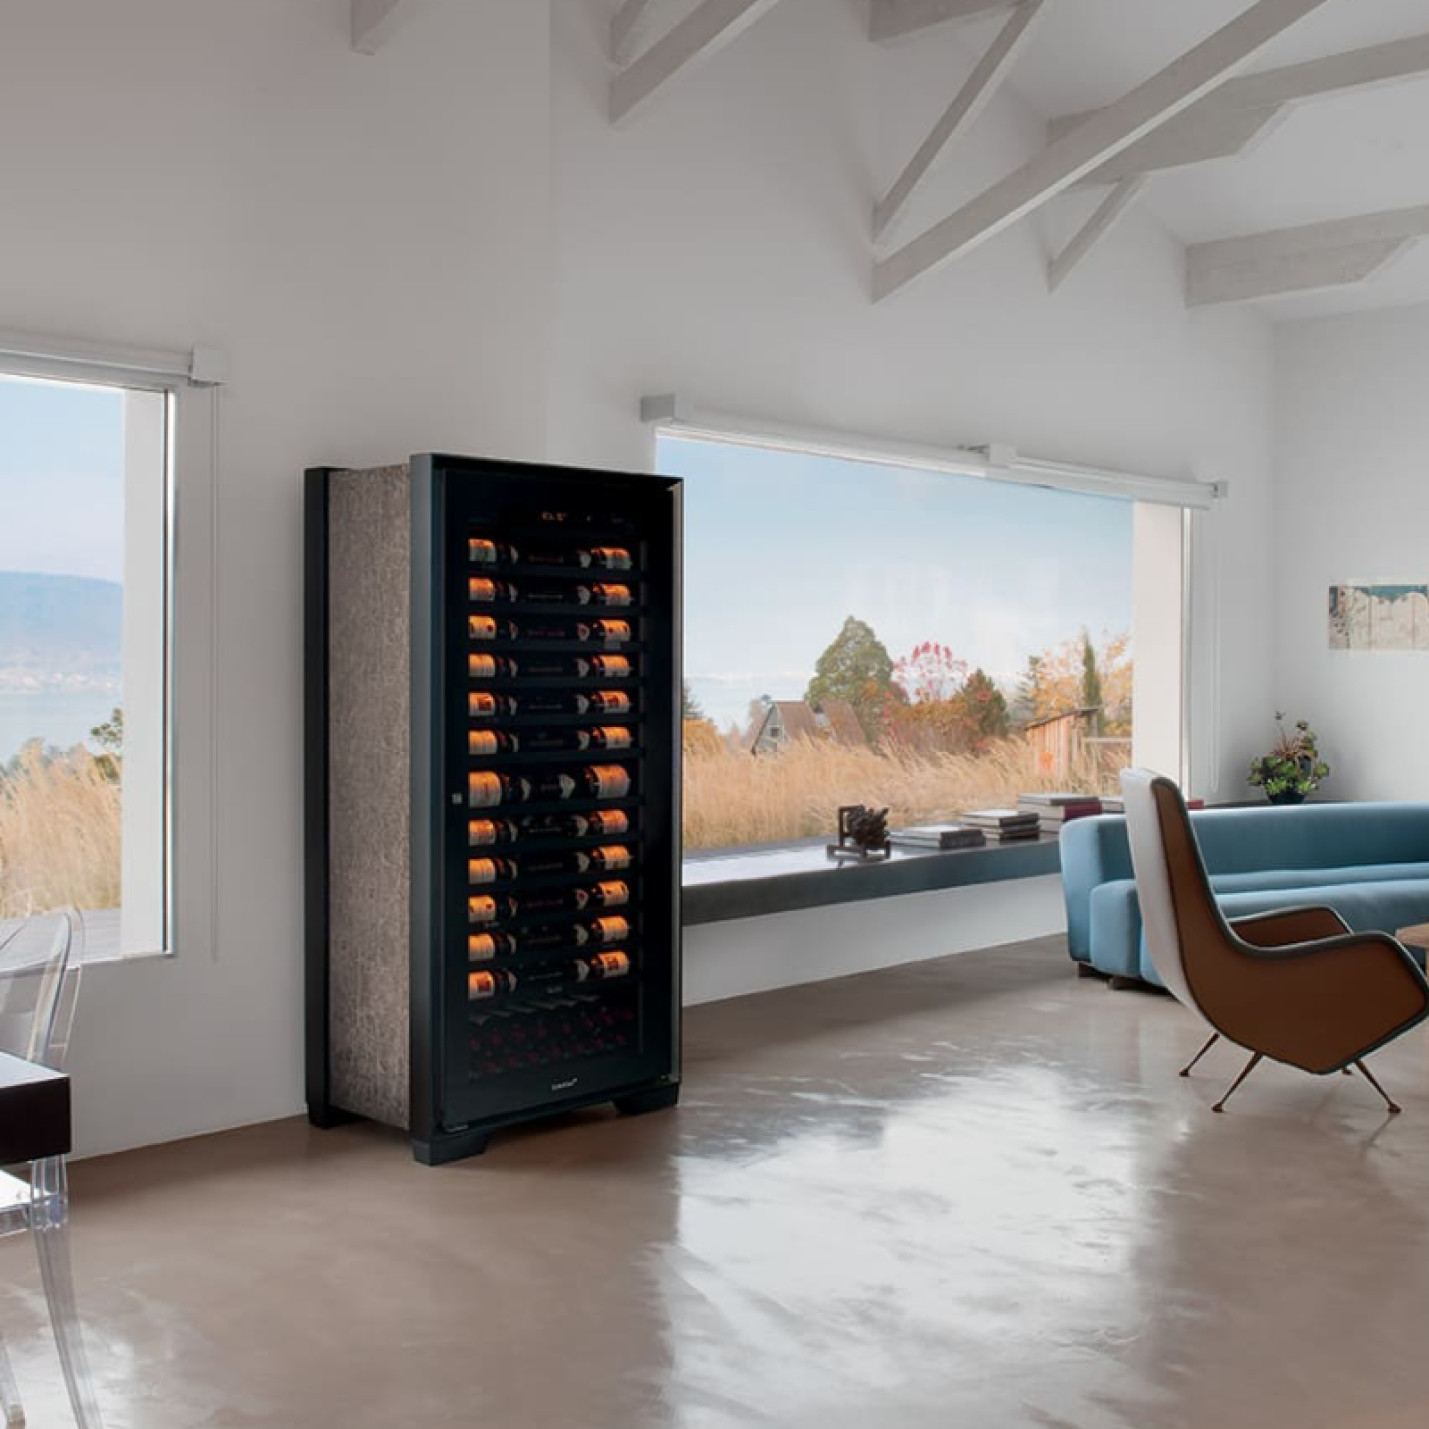 An aging wine cabinet par excellence, the EuroCave Royale wine cellar is installed in a living room with a view and designer furniture.